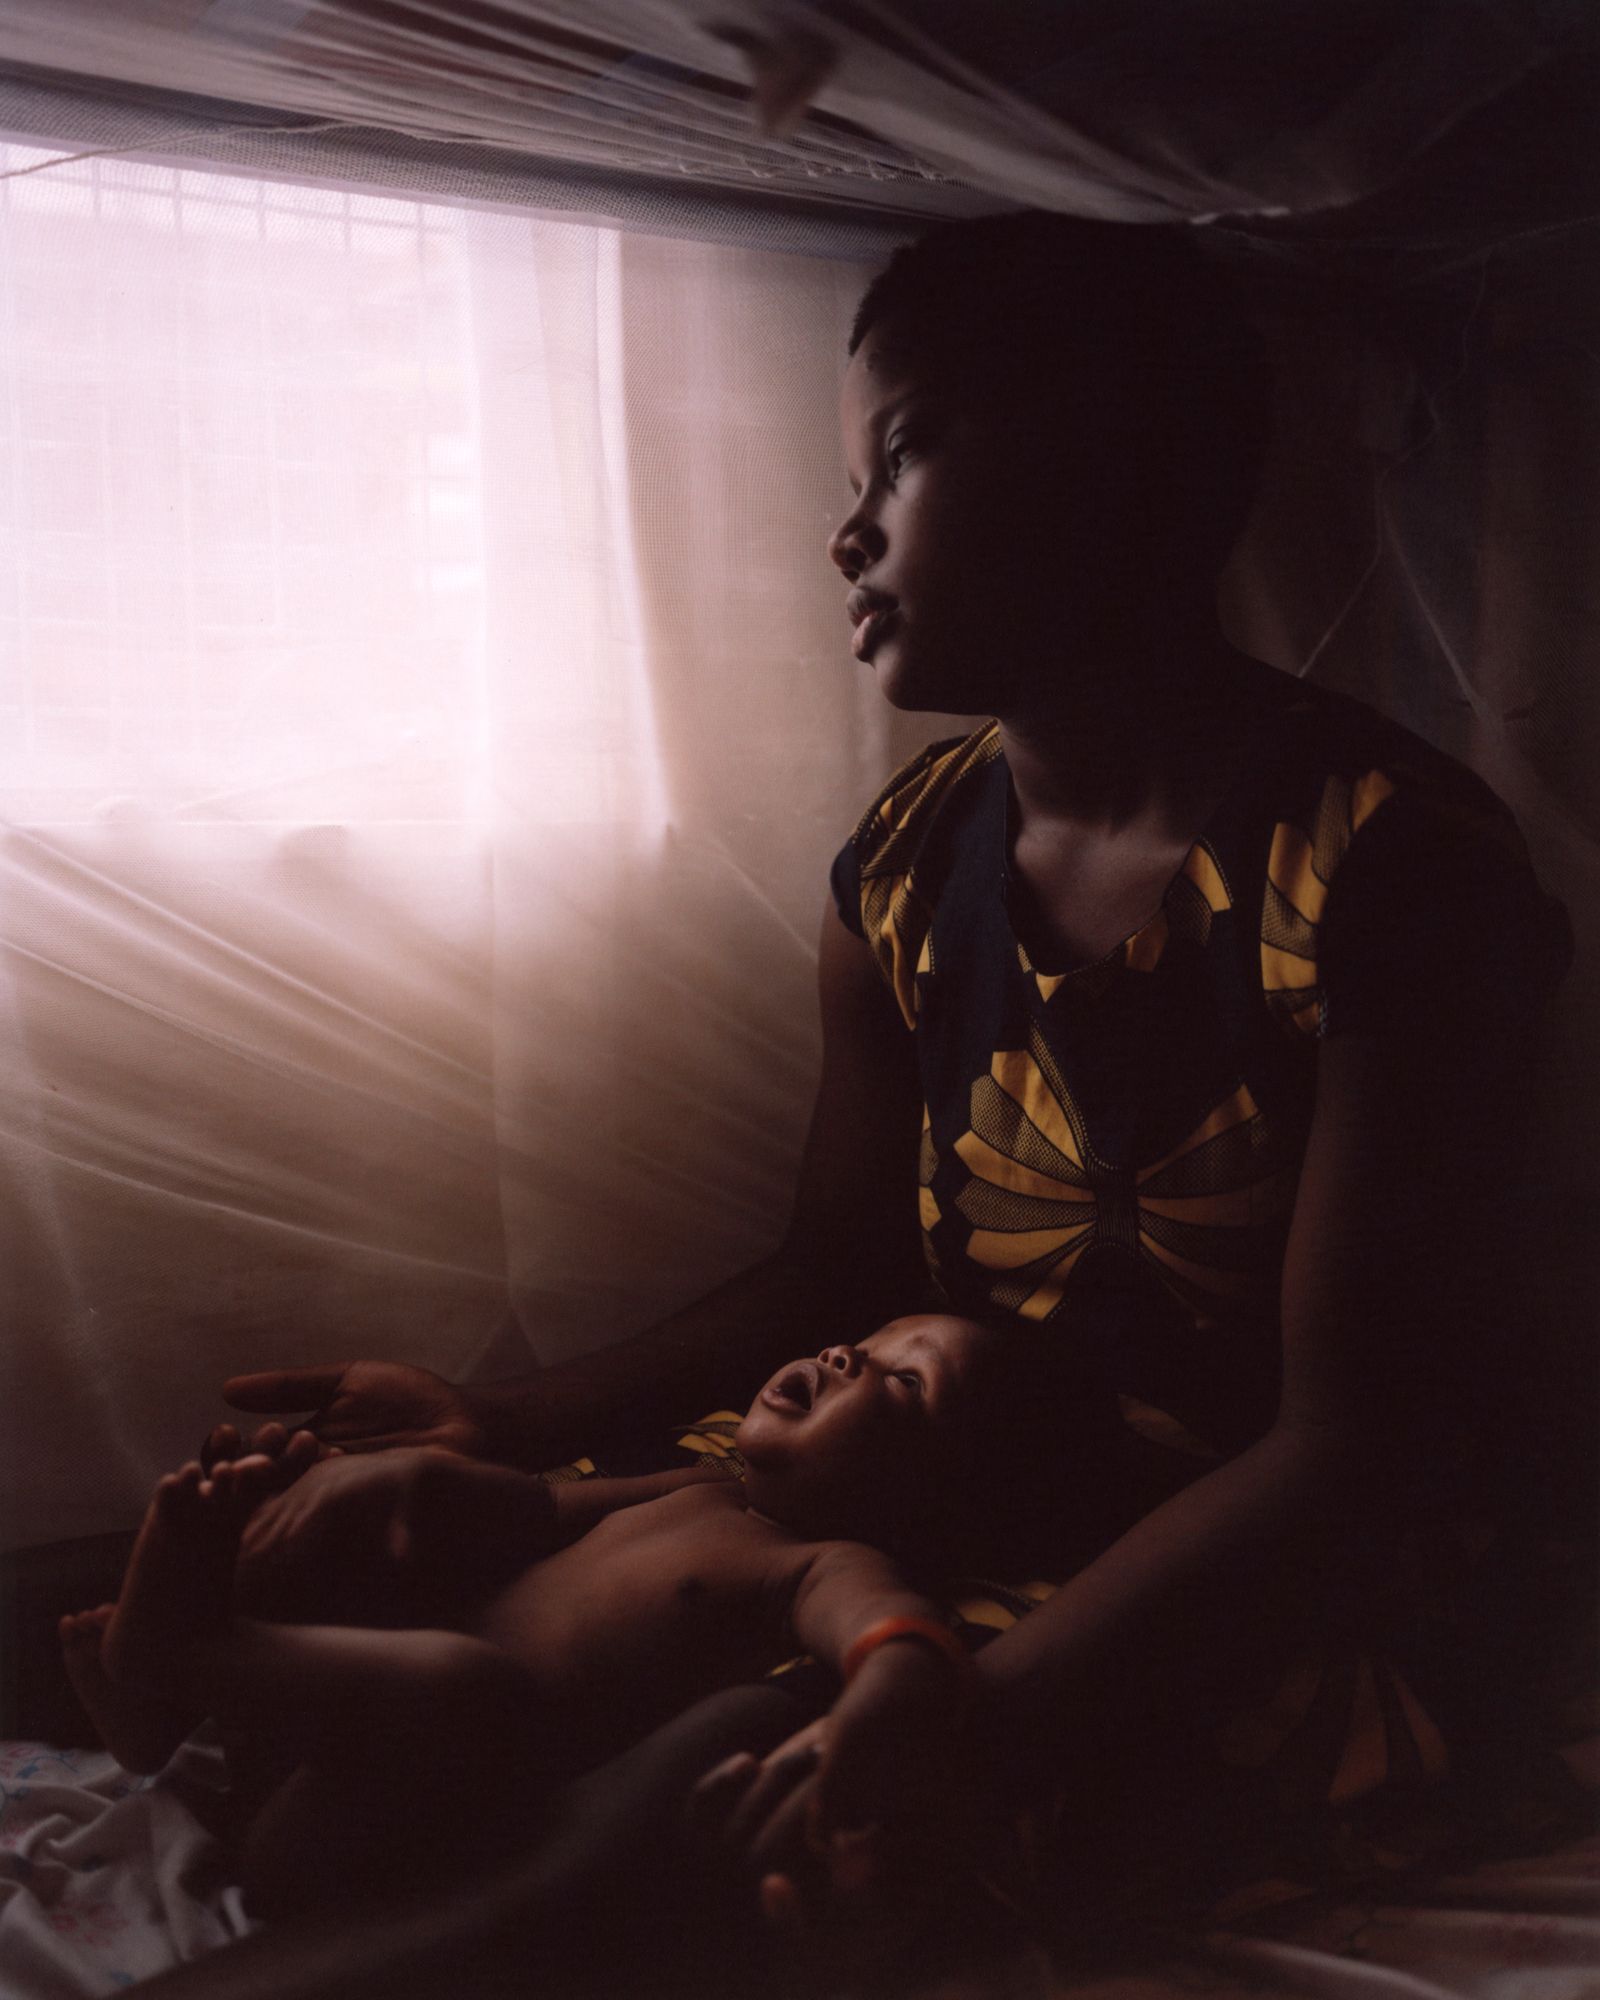 © Sofia Busk - Image from the Daughters of Nairobi photography project